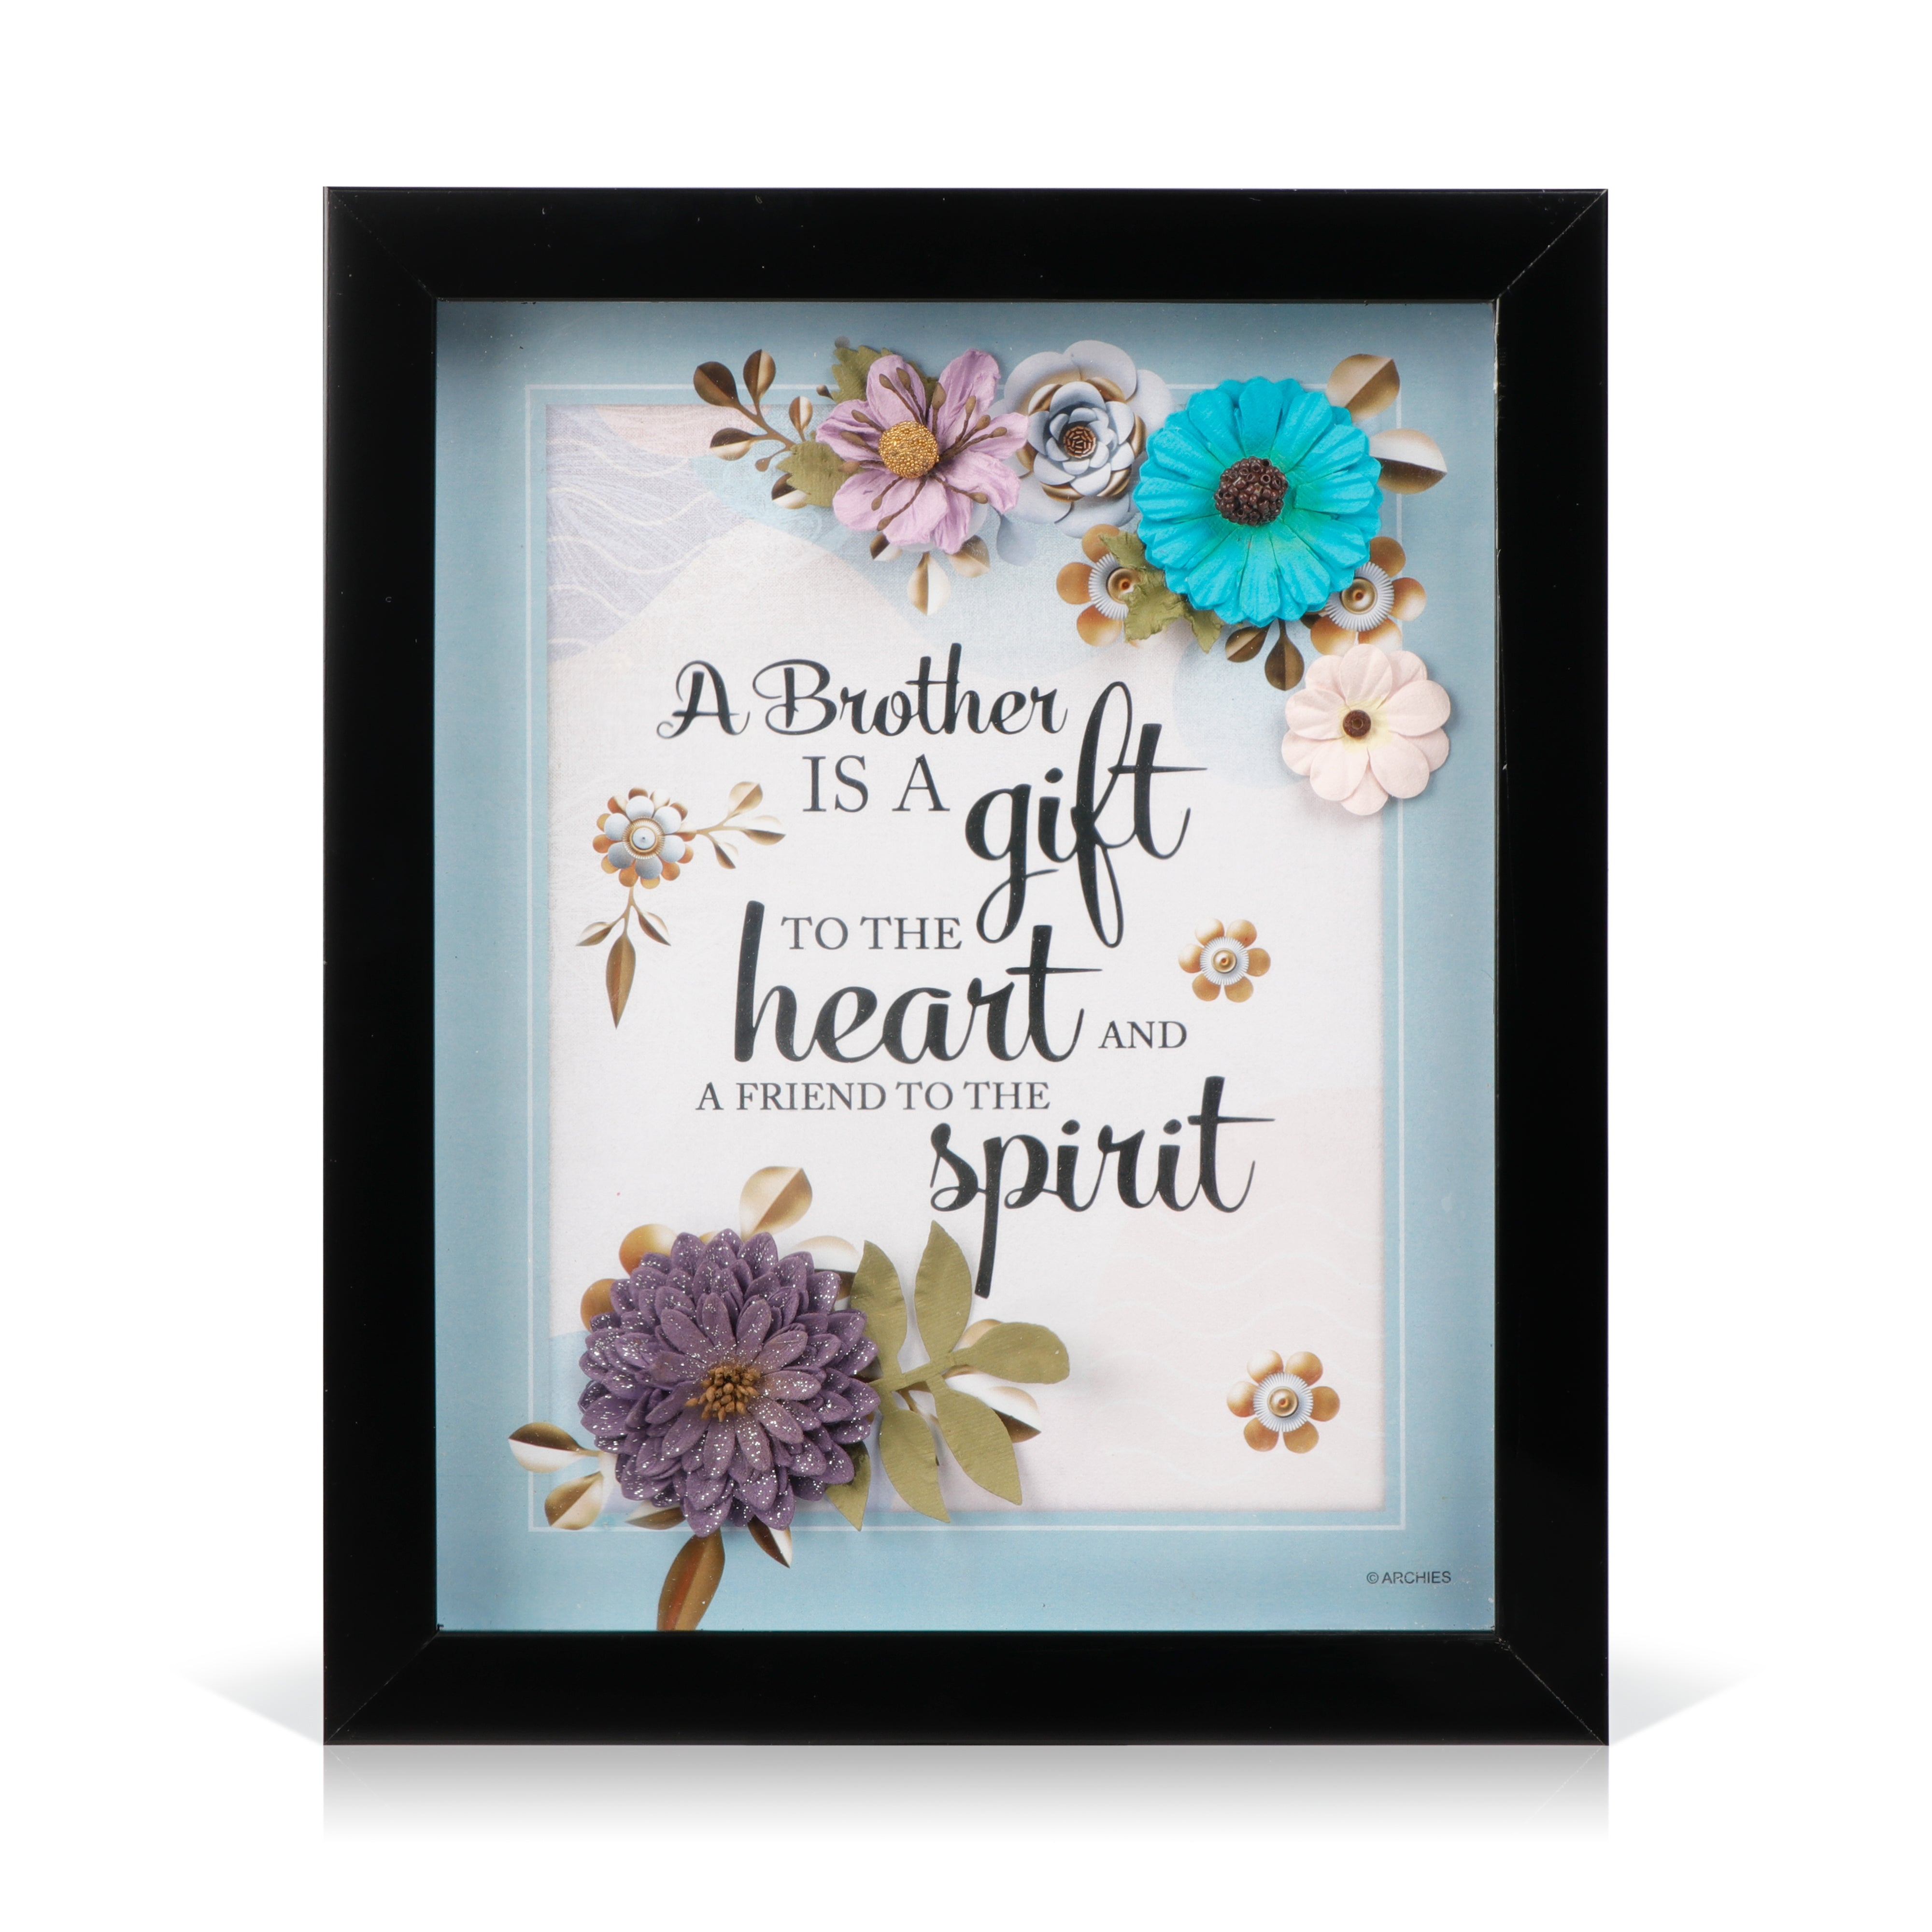 Archies KEEPSAKE QUOTATION - A BROTHER IS.....SPIRIT For gifting and Home décor